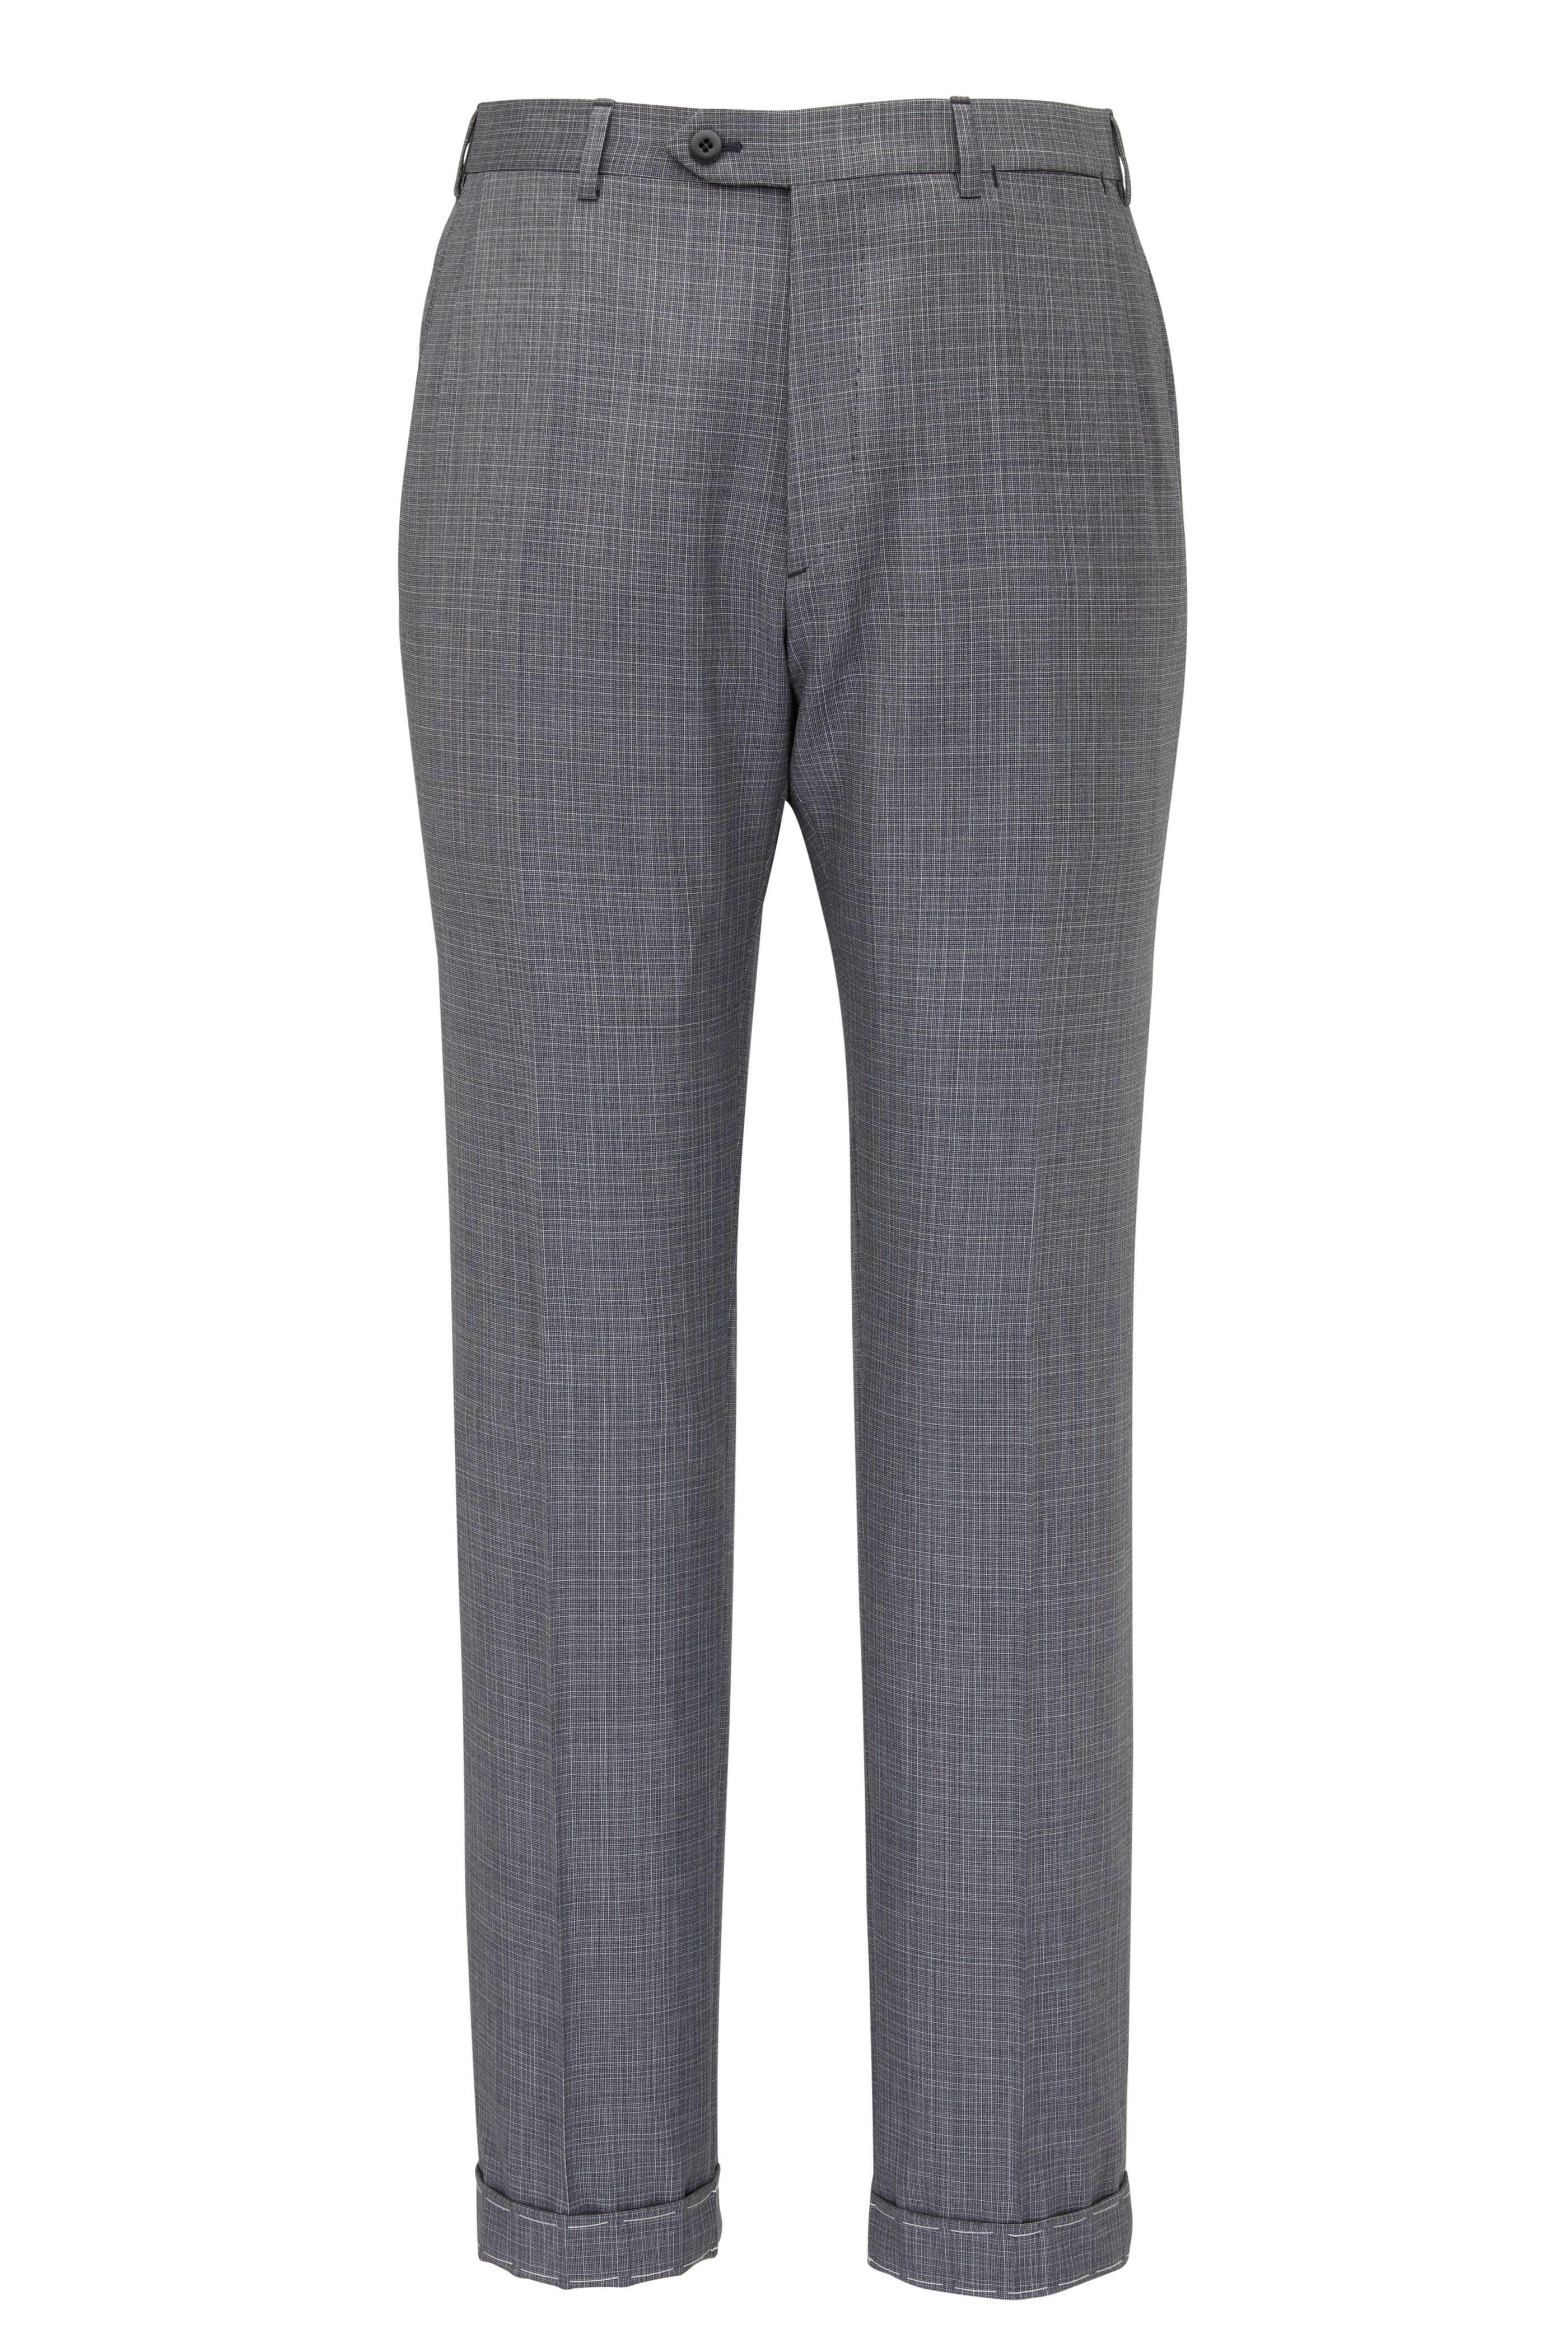 Brioni - Gray Screen Check Wool Suit | Mitchell Stores